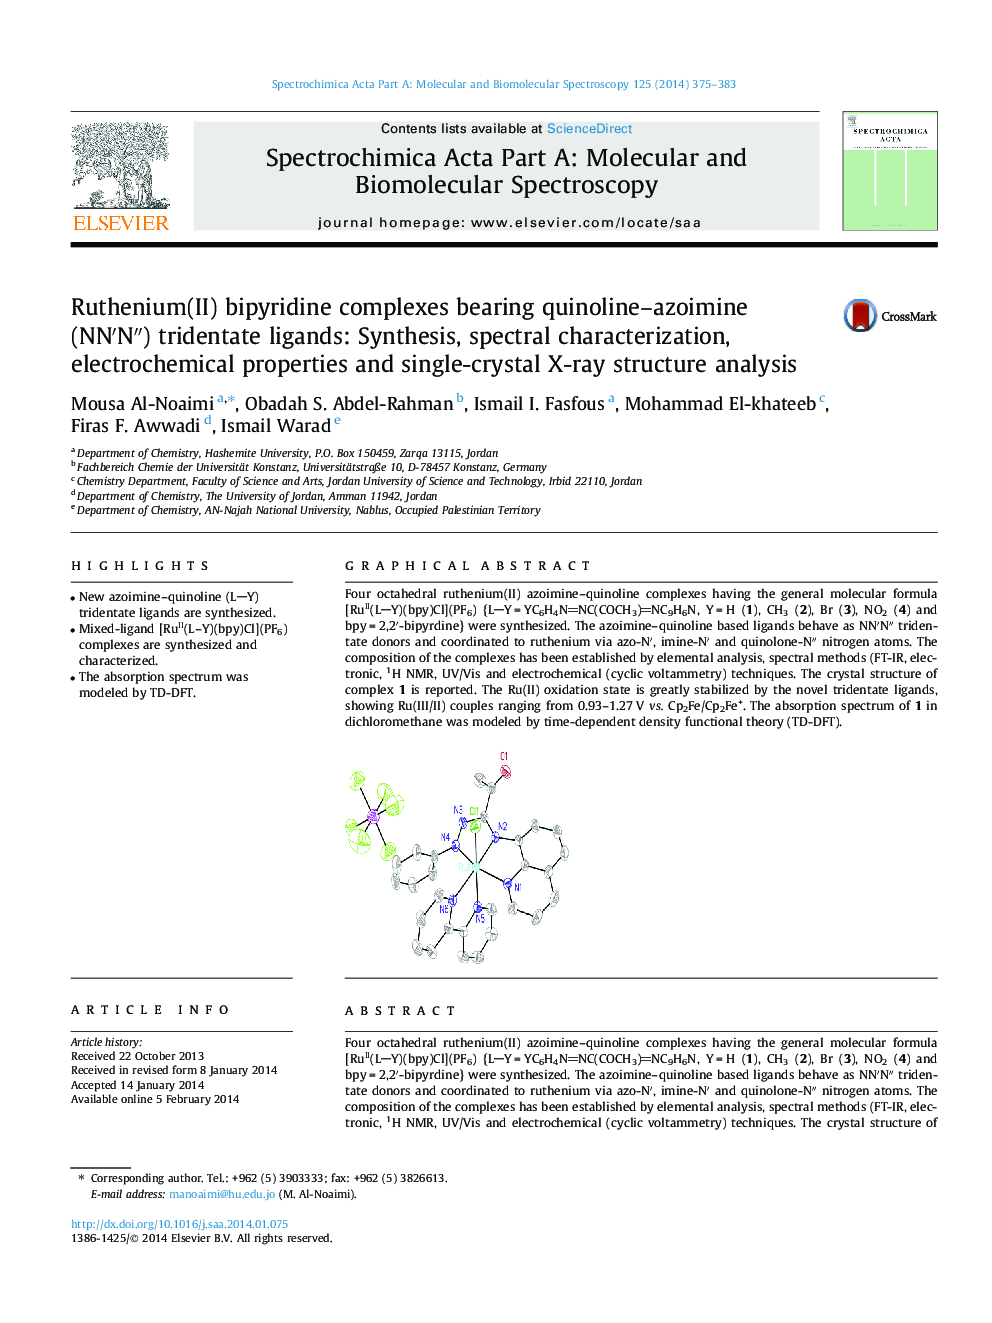 Ruthenium(II) bipyridine complexes bearing quinoline–azoimine (NN′N″) tridentate ligands: Synthesis, spectral characterization, electrochemical properties and single-crystal X-ray structure analysis